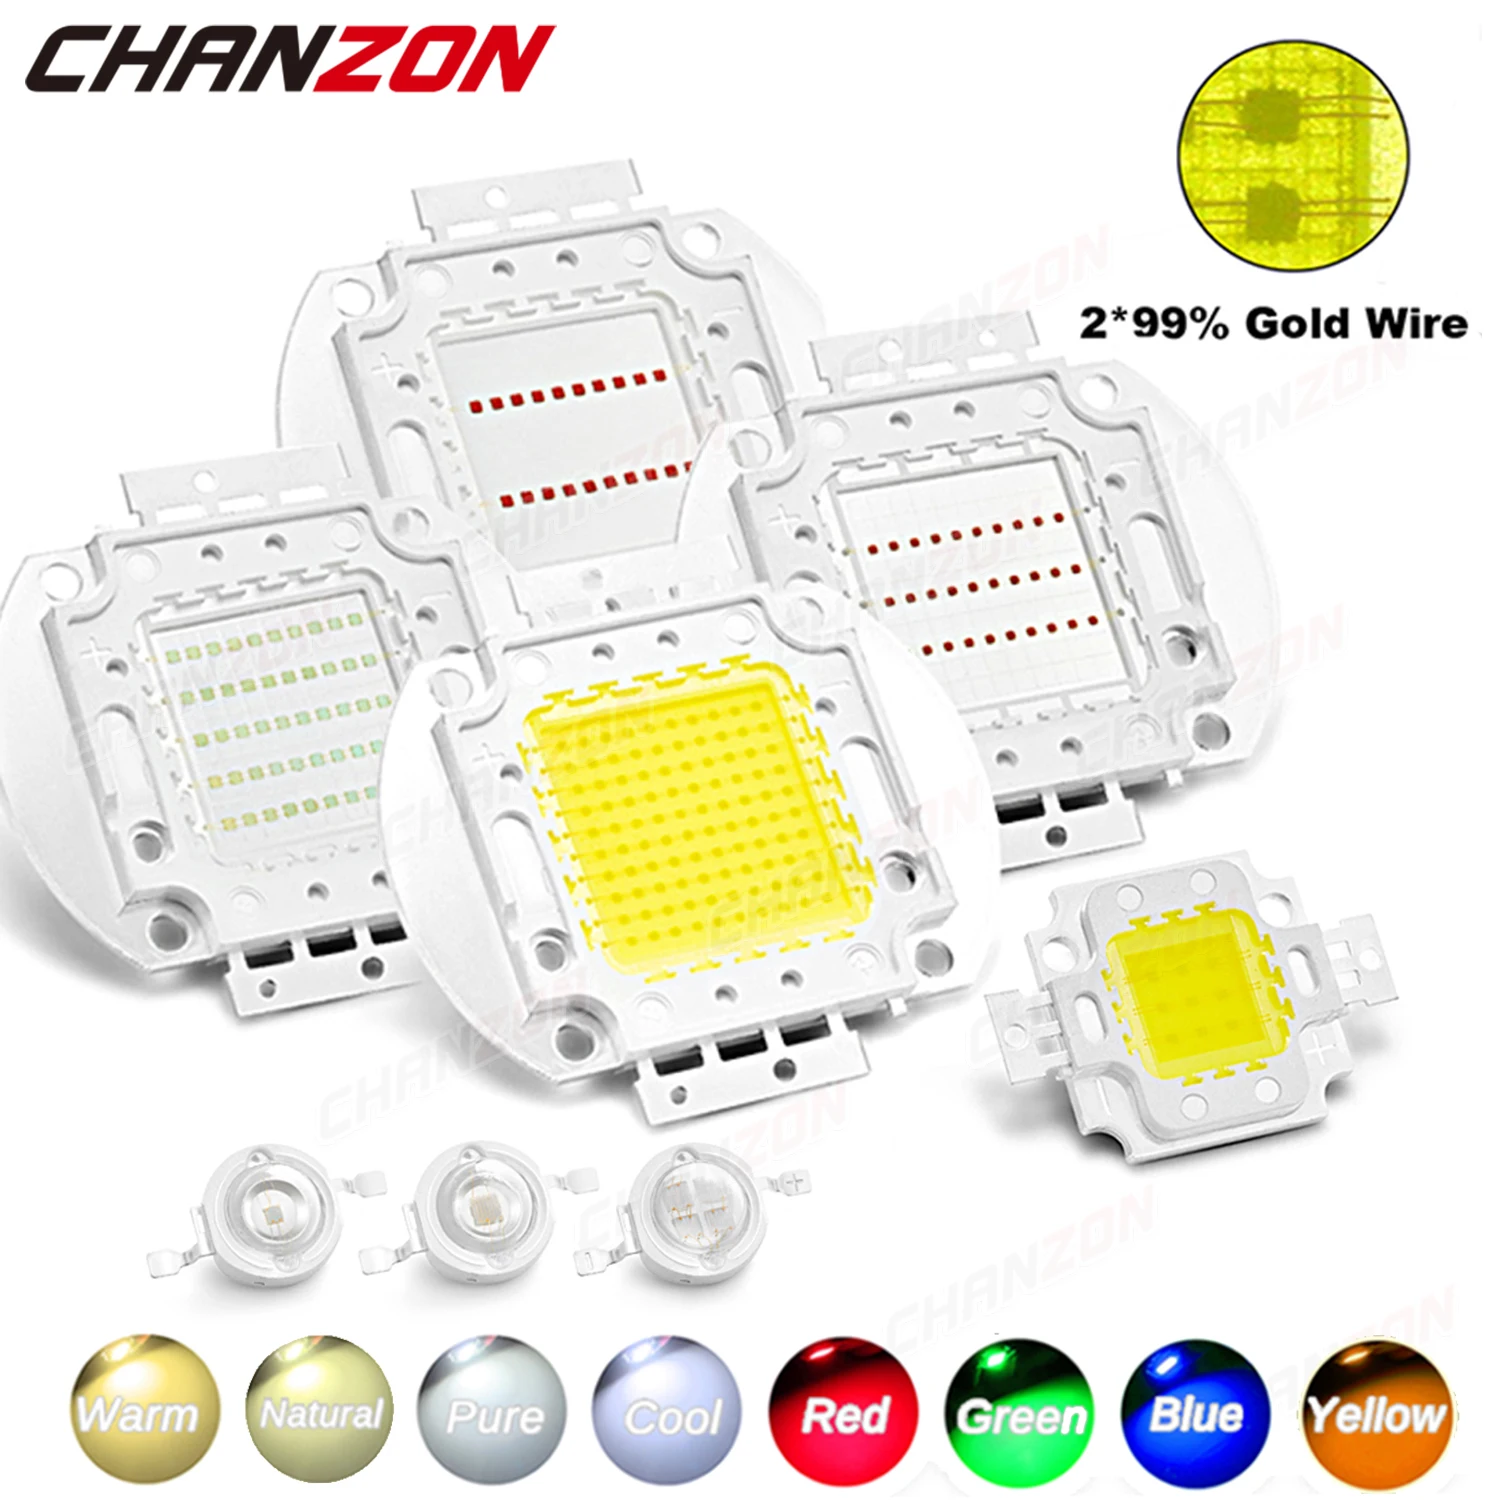 1W 3W 5W 10W 20W 30W 50W 100W High Power LED Chip Warm Cool White Red Green Blue Square Light Matrix Integrated COB Lamp 1 20pcs max7219 dot matrix module control single chip module 4 in 1 display send 5p cable for arduino red green blue